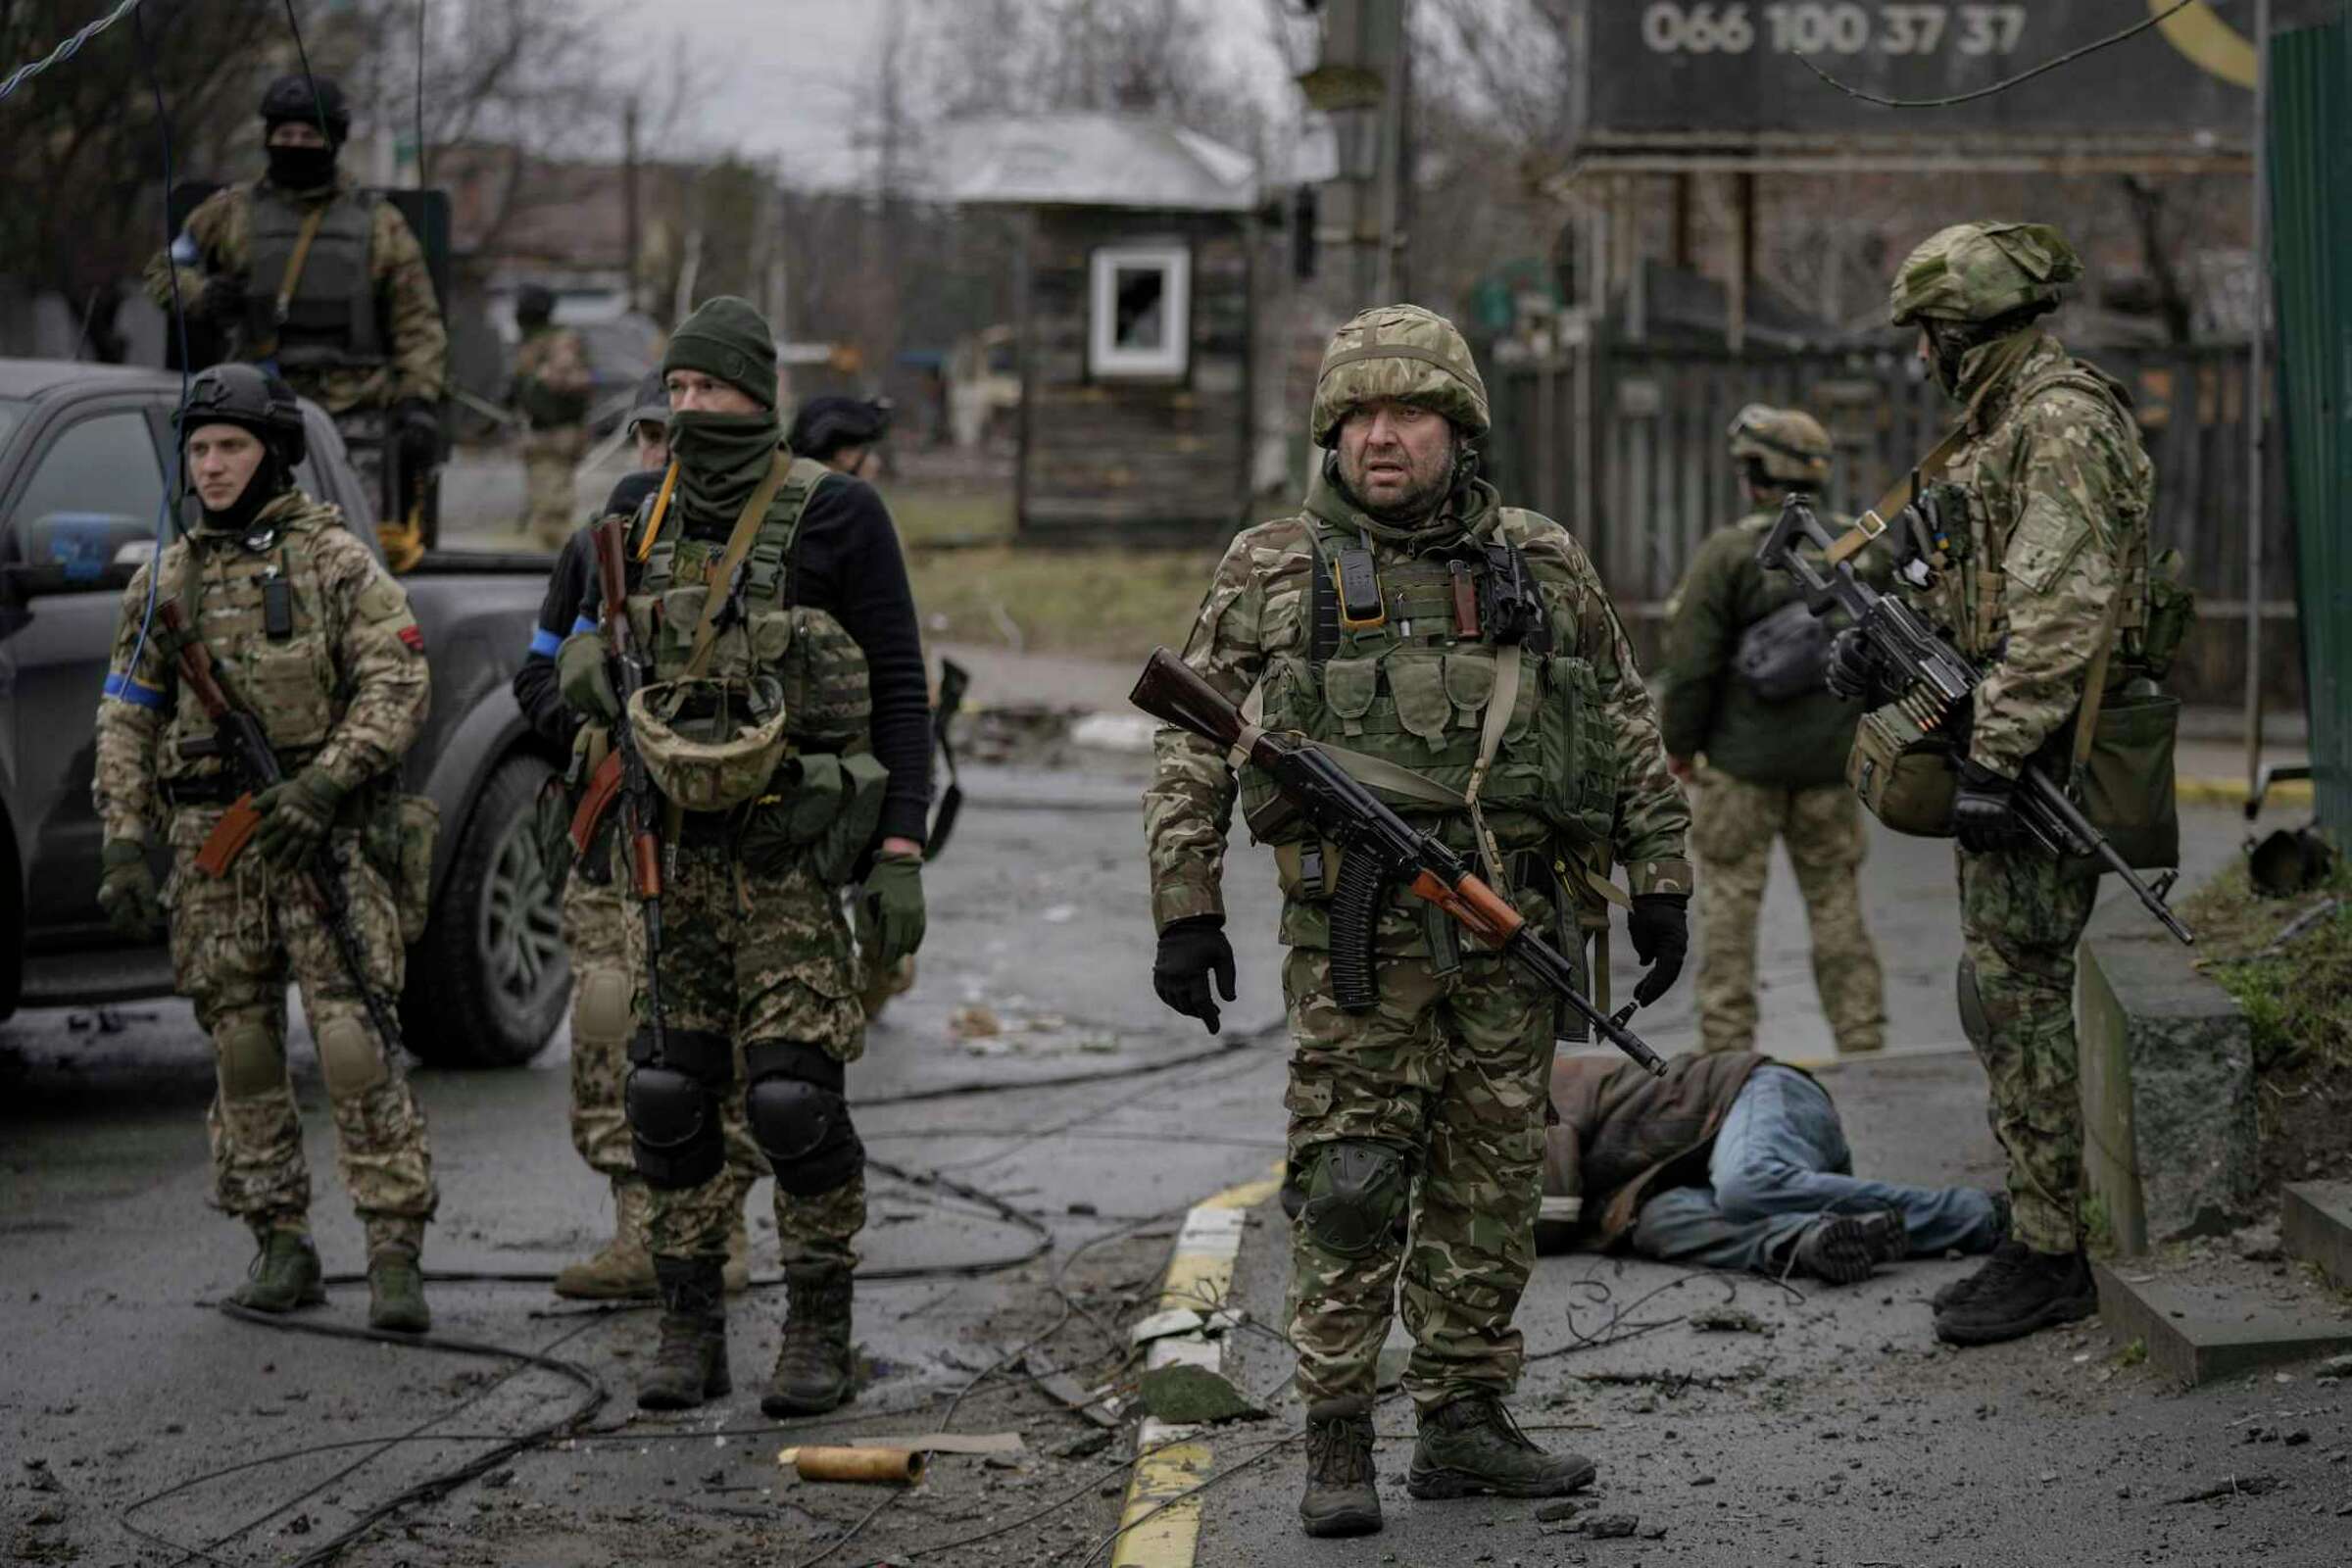 Ukrainian servicemen stand next to the body of man dressed in civilian clothing, in the formerly Russian-occupied Kyiv suburb of Bucha, Ukraine, on Saturday, 2 April 2022. Photo: Vadim Ghirda / AP